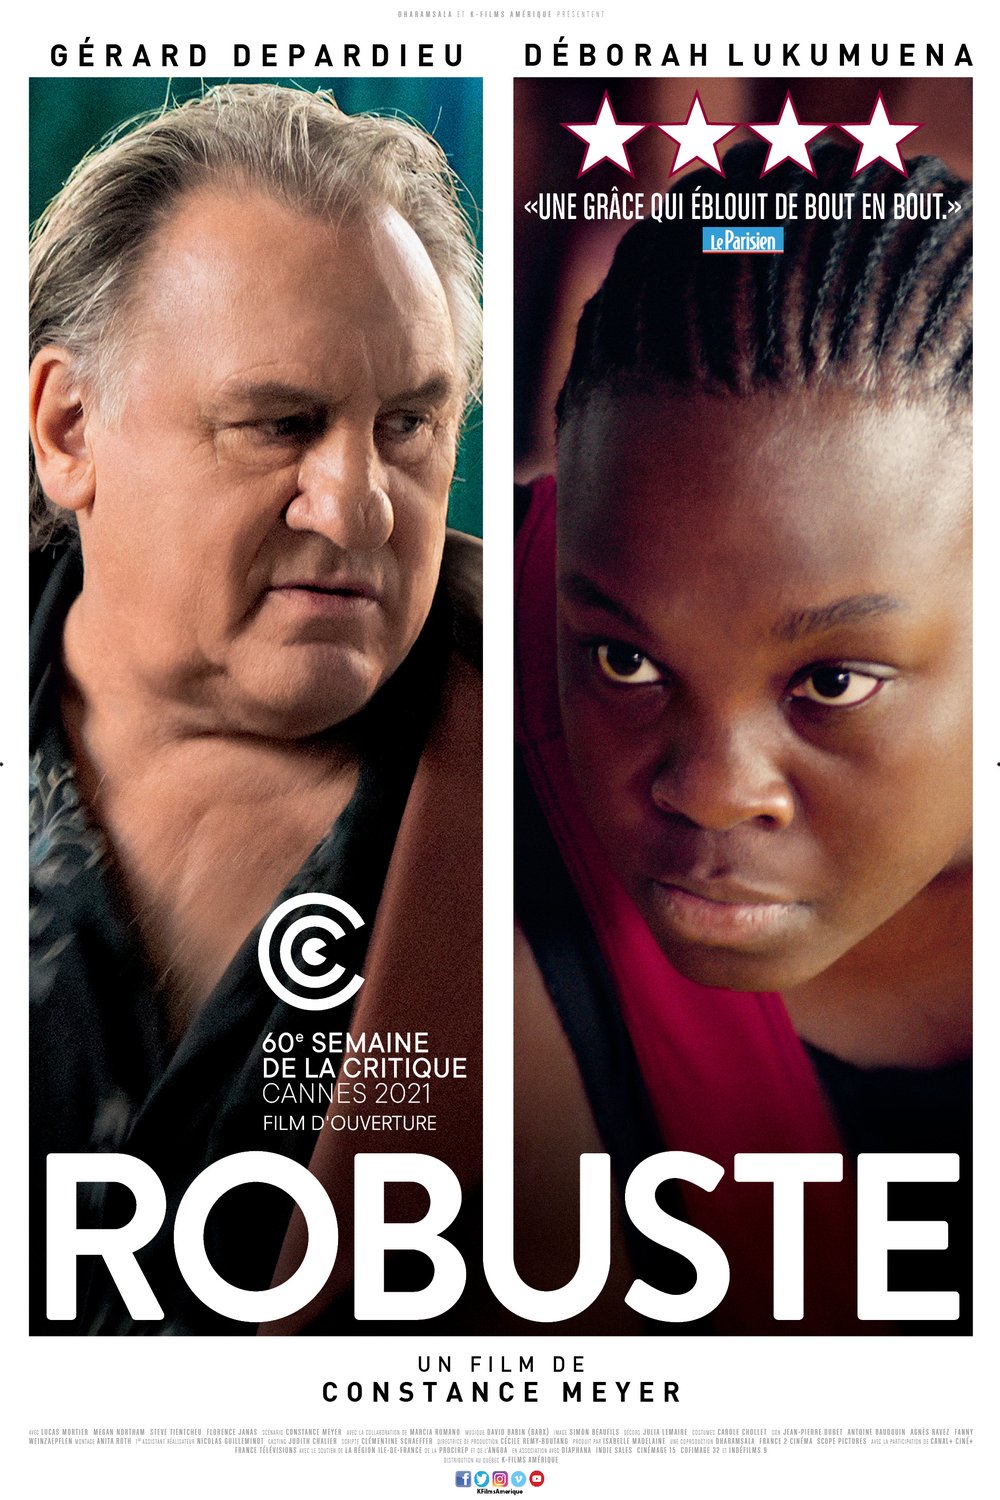 Poster of the movie Robust